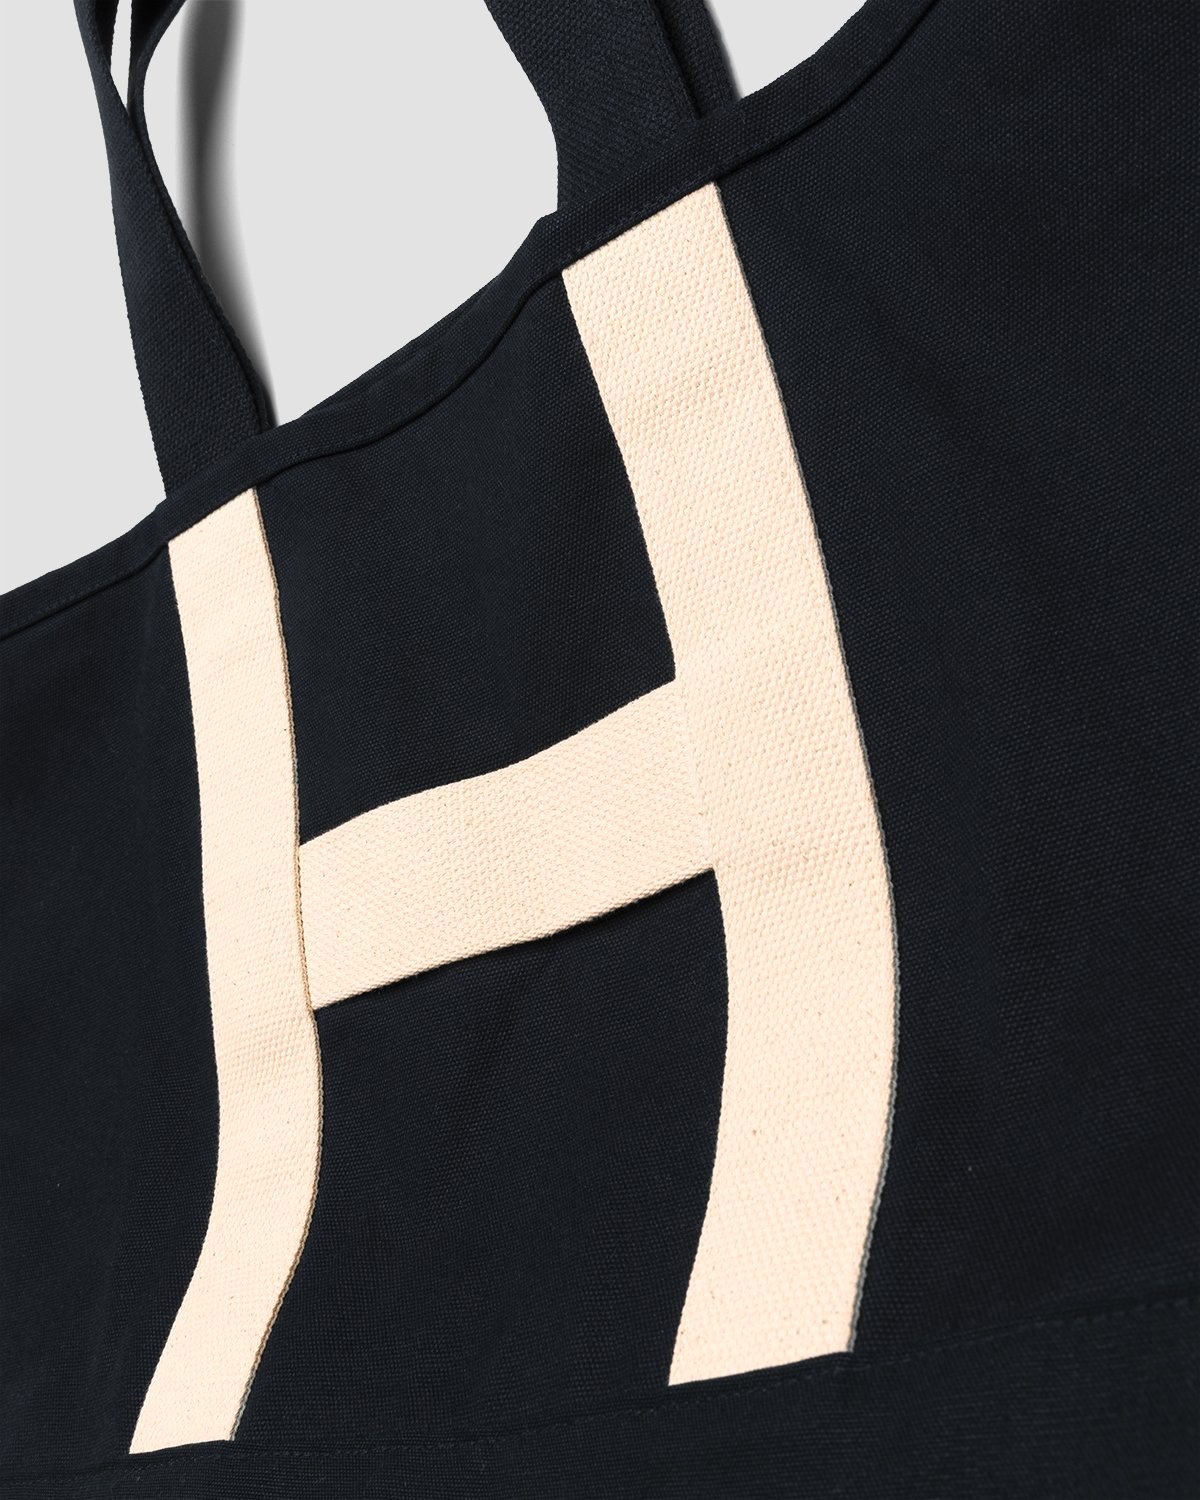 Highsnobiety – Heavy Canvas Large Shopper Tote Black - Tote Bags - Black - Image 3